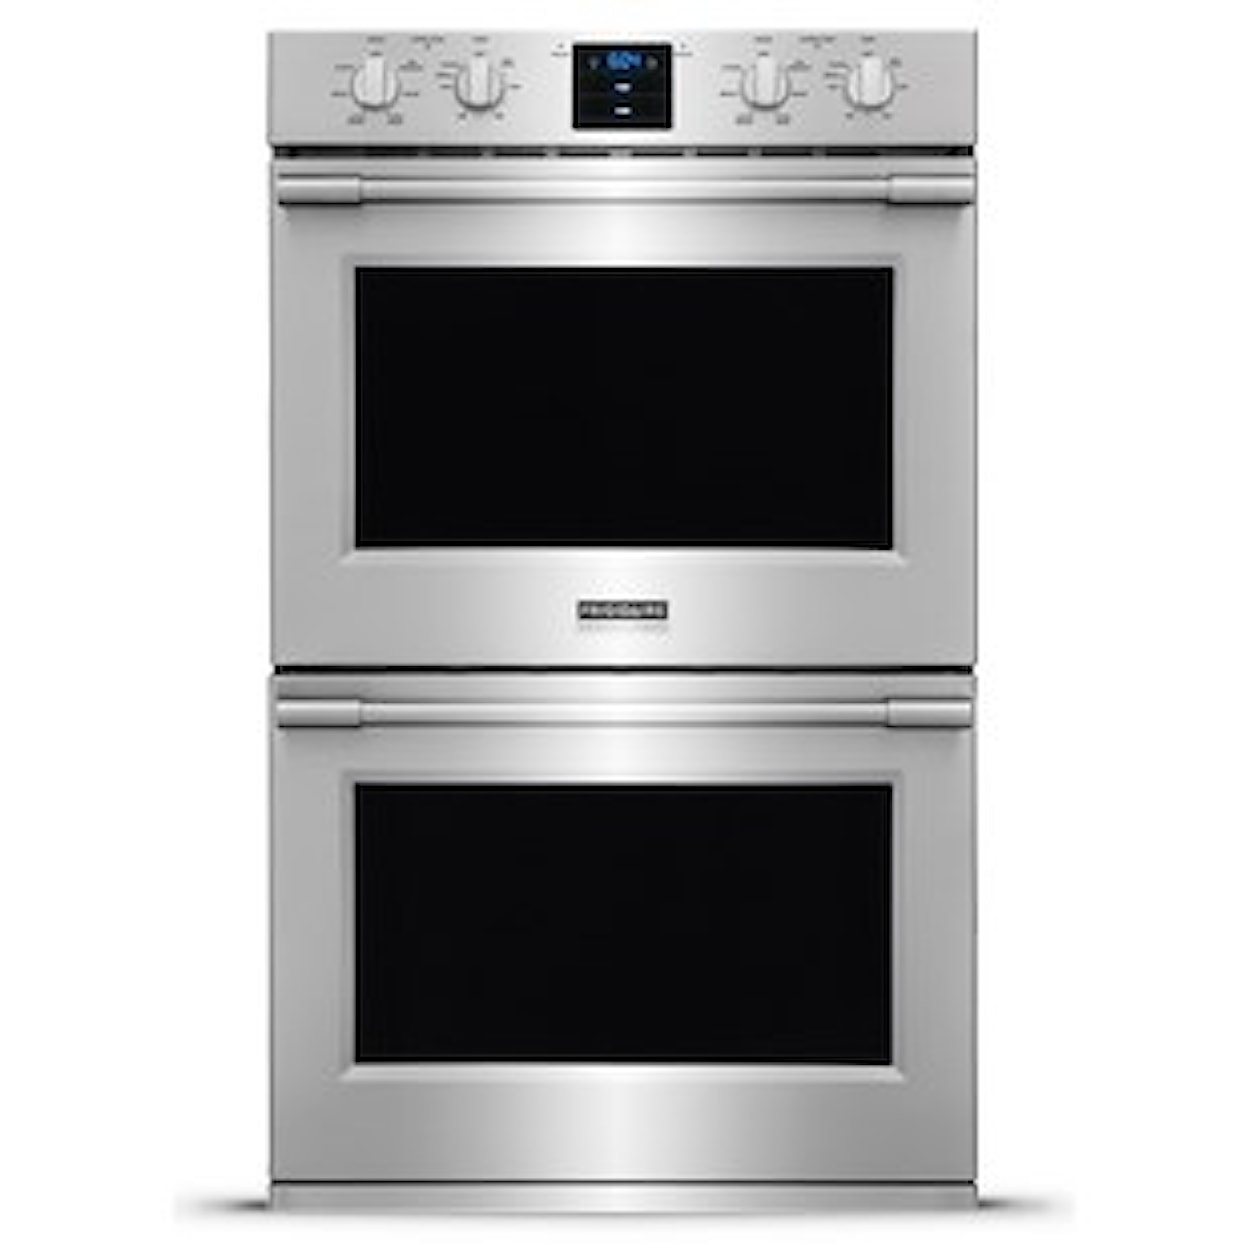 Frigidaire Professional Collection - Ovens 30" Double Electric Wall Oven